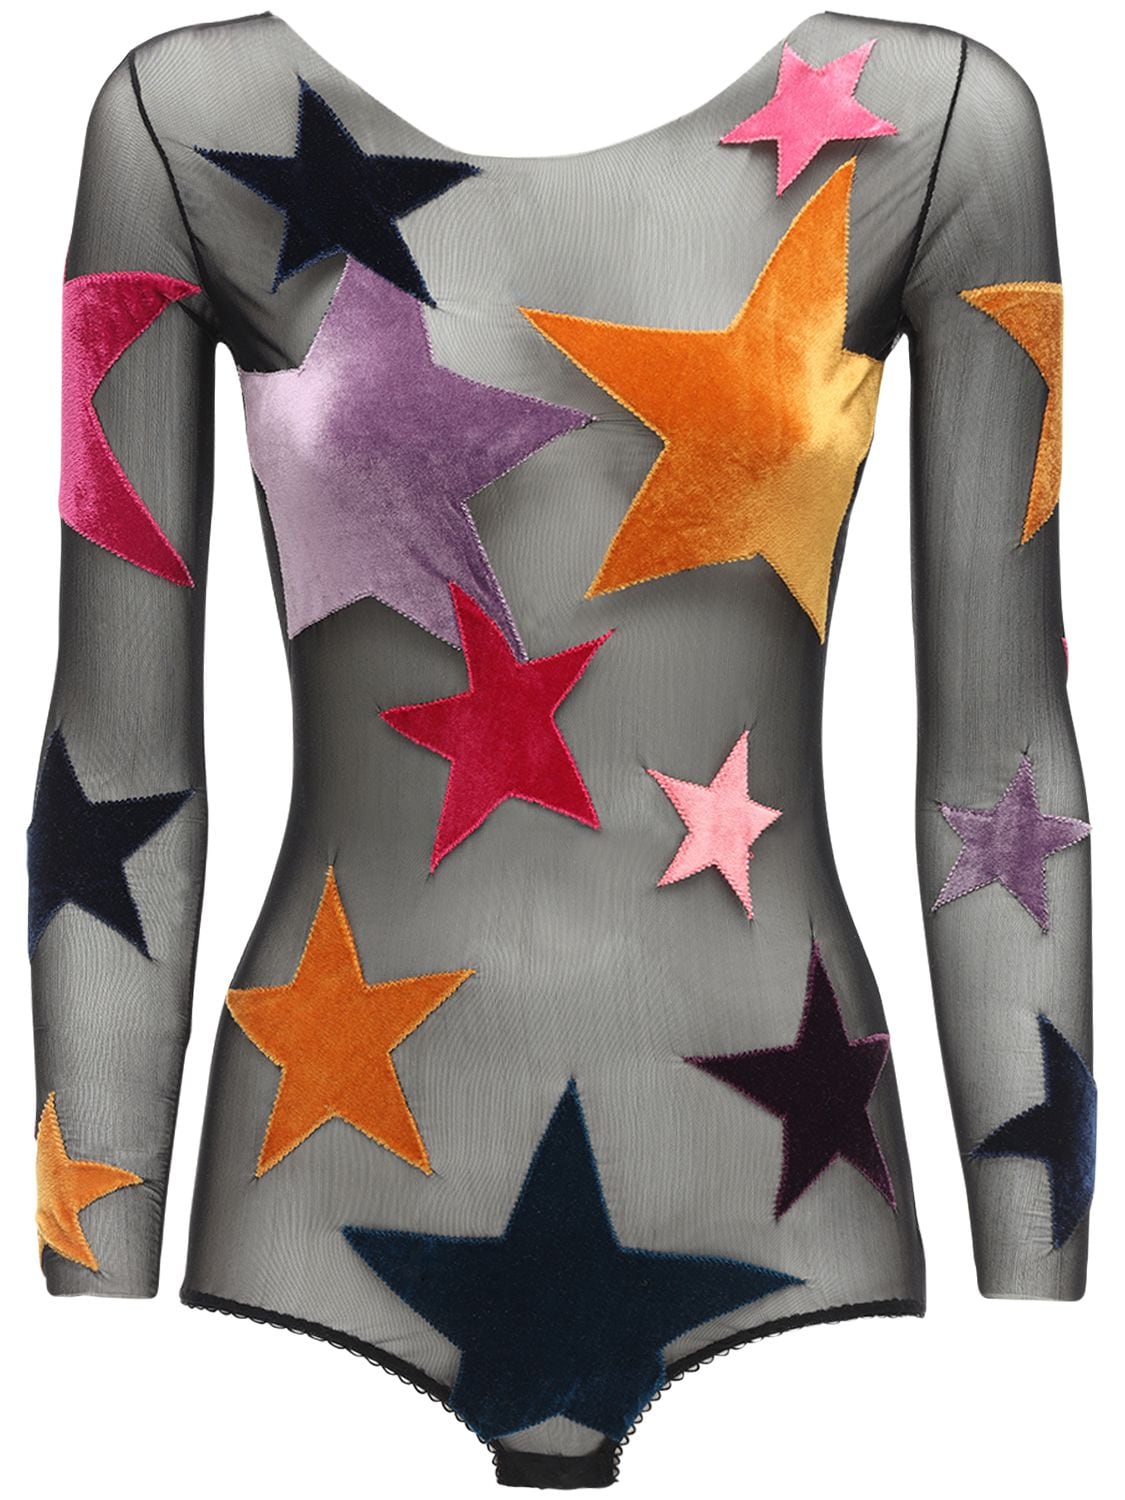 Alexia Hentsch Tulle Star Patches Bodysuit In Black,multi